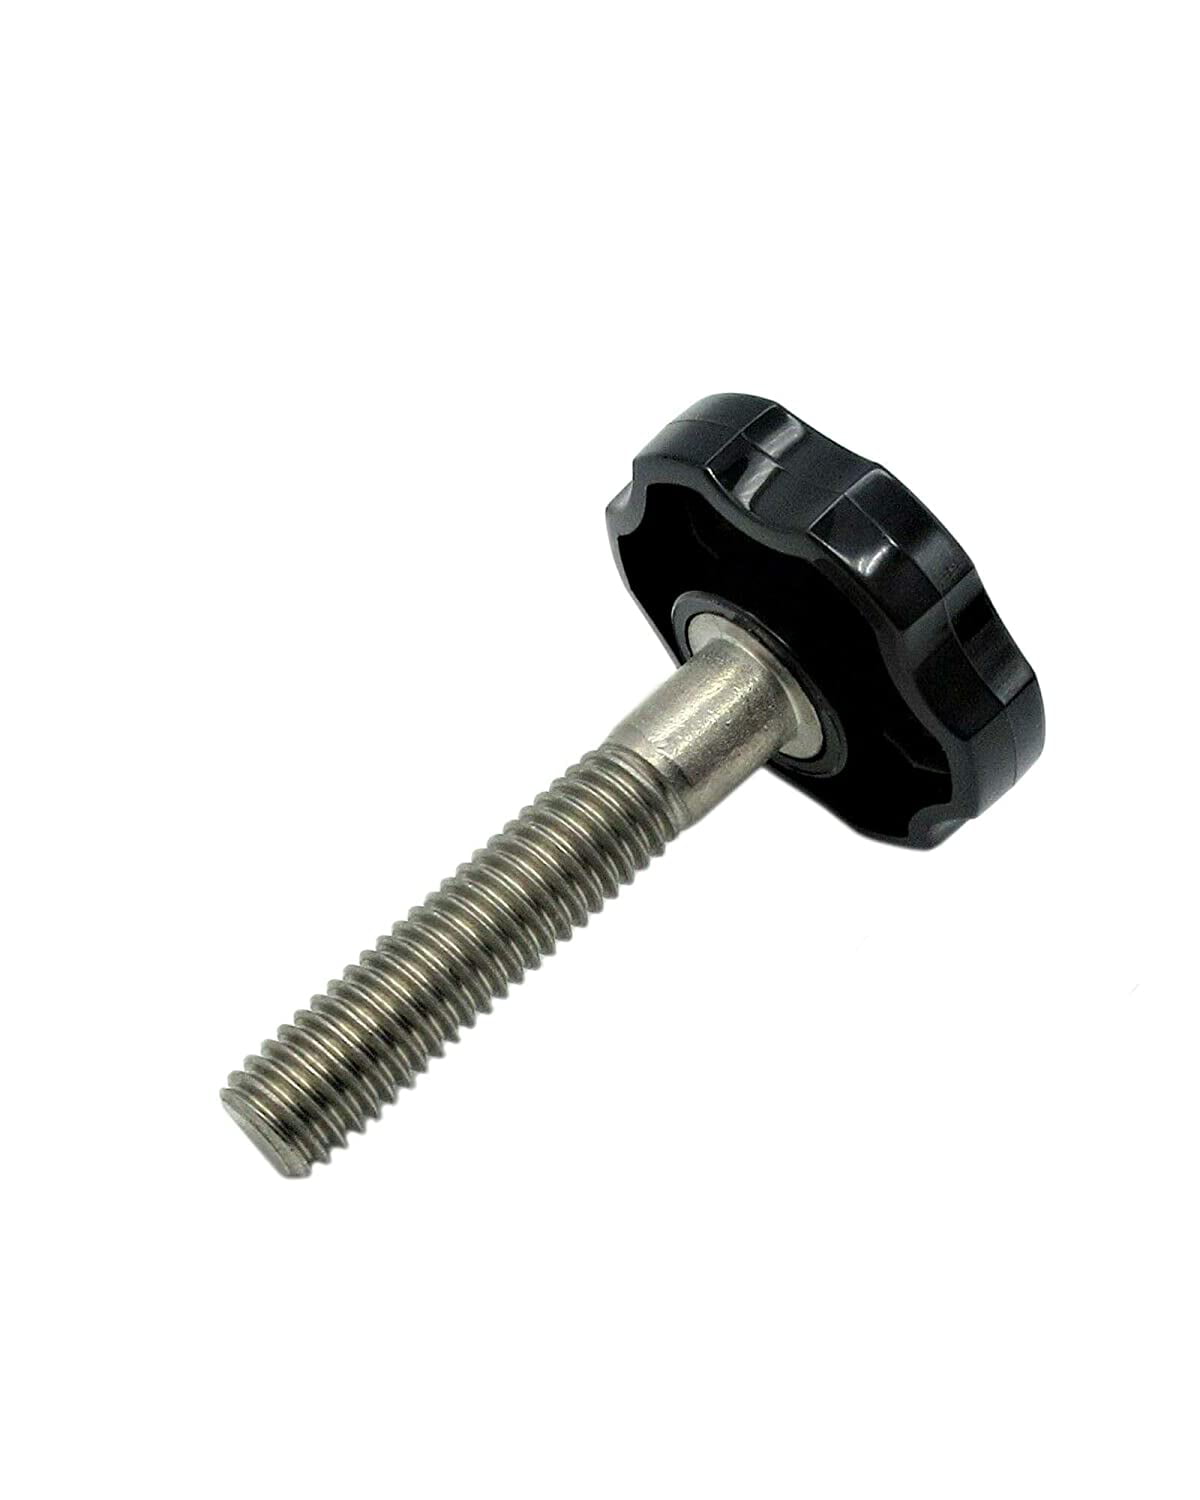 M6 Clamping Knob Thumb Screw with Knurled Knob multiple lengths and Colors 